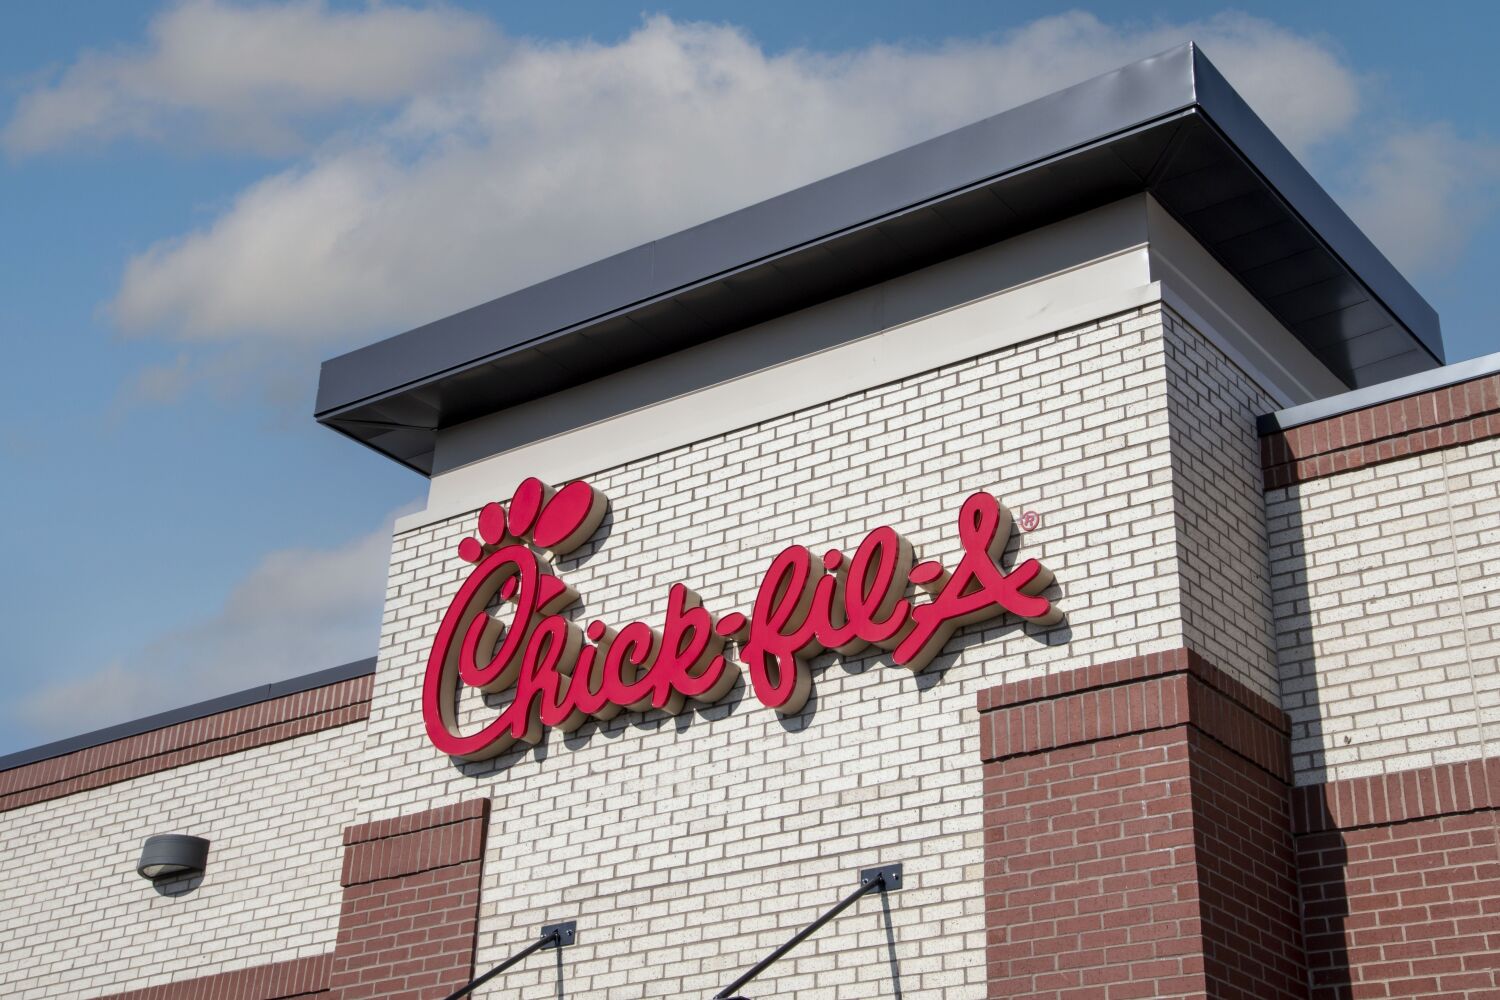 Granderson: When even Chick-fil-A is angering the right, no company is safe